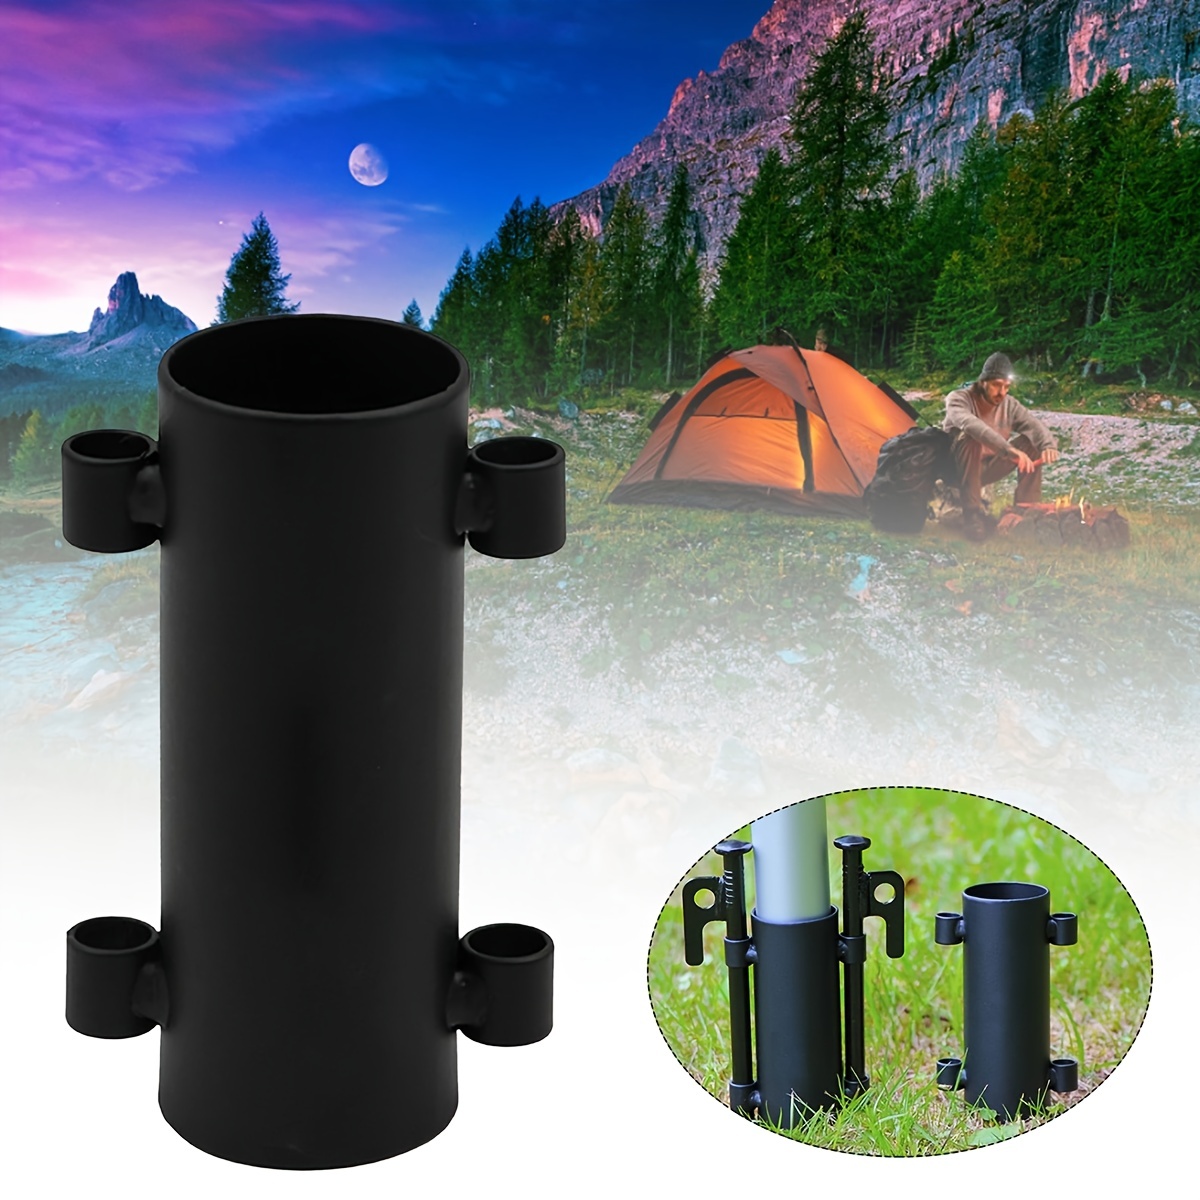 Canopy Rod Holder Windproof Outdoor Camping Awning Rod Holder for